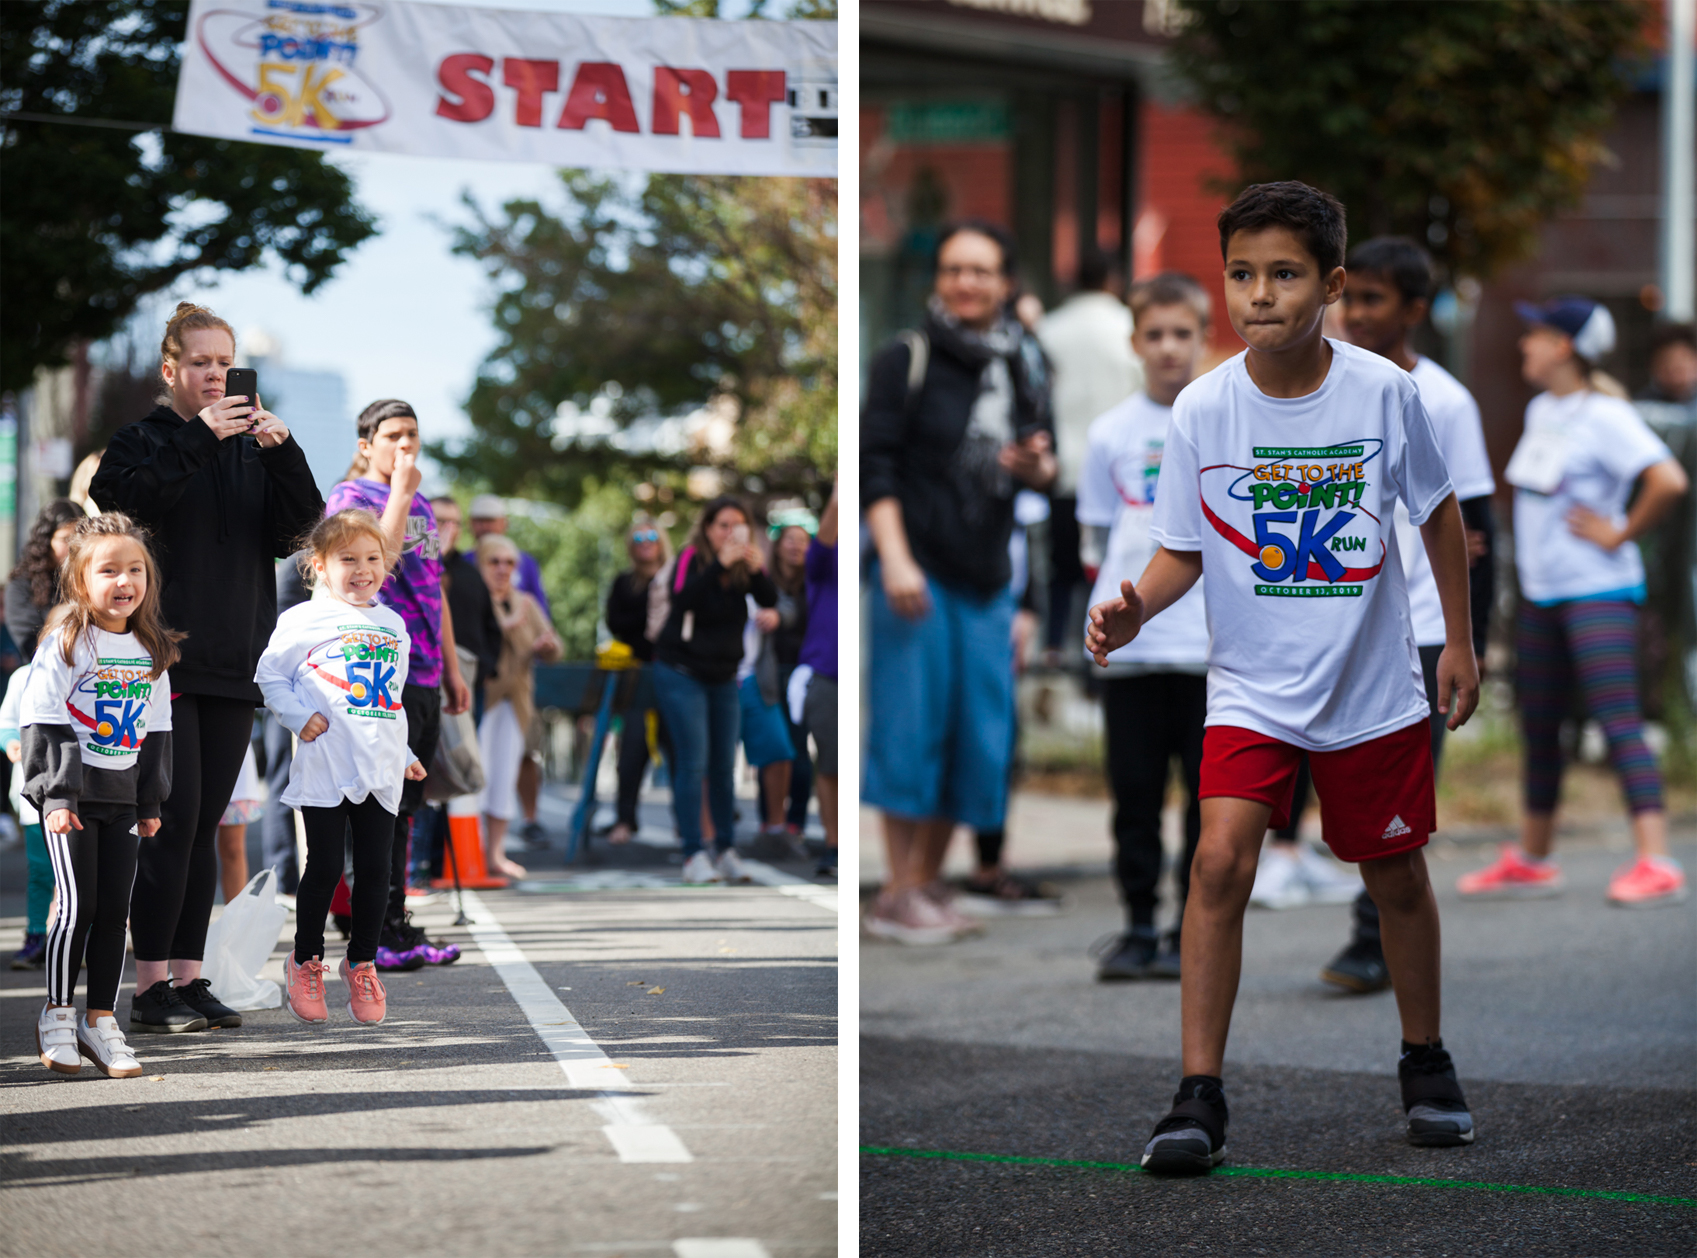 Left: Kids cheer on their friends in the dashes. Right: Anthony Puk, 9, gets ready for his dash. Eagle photos by Paul Frangipane